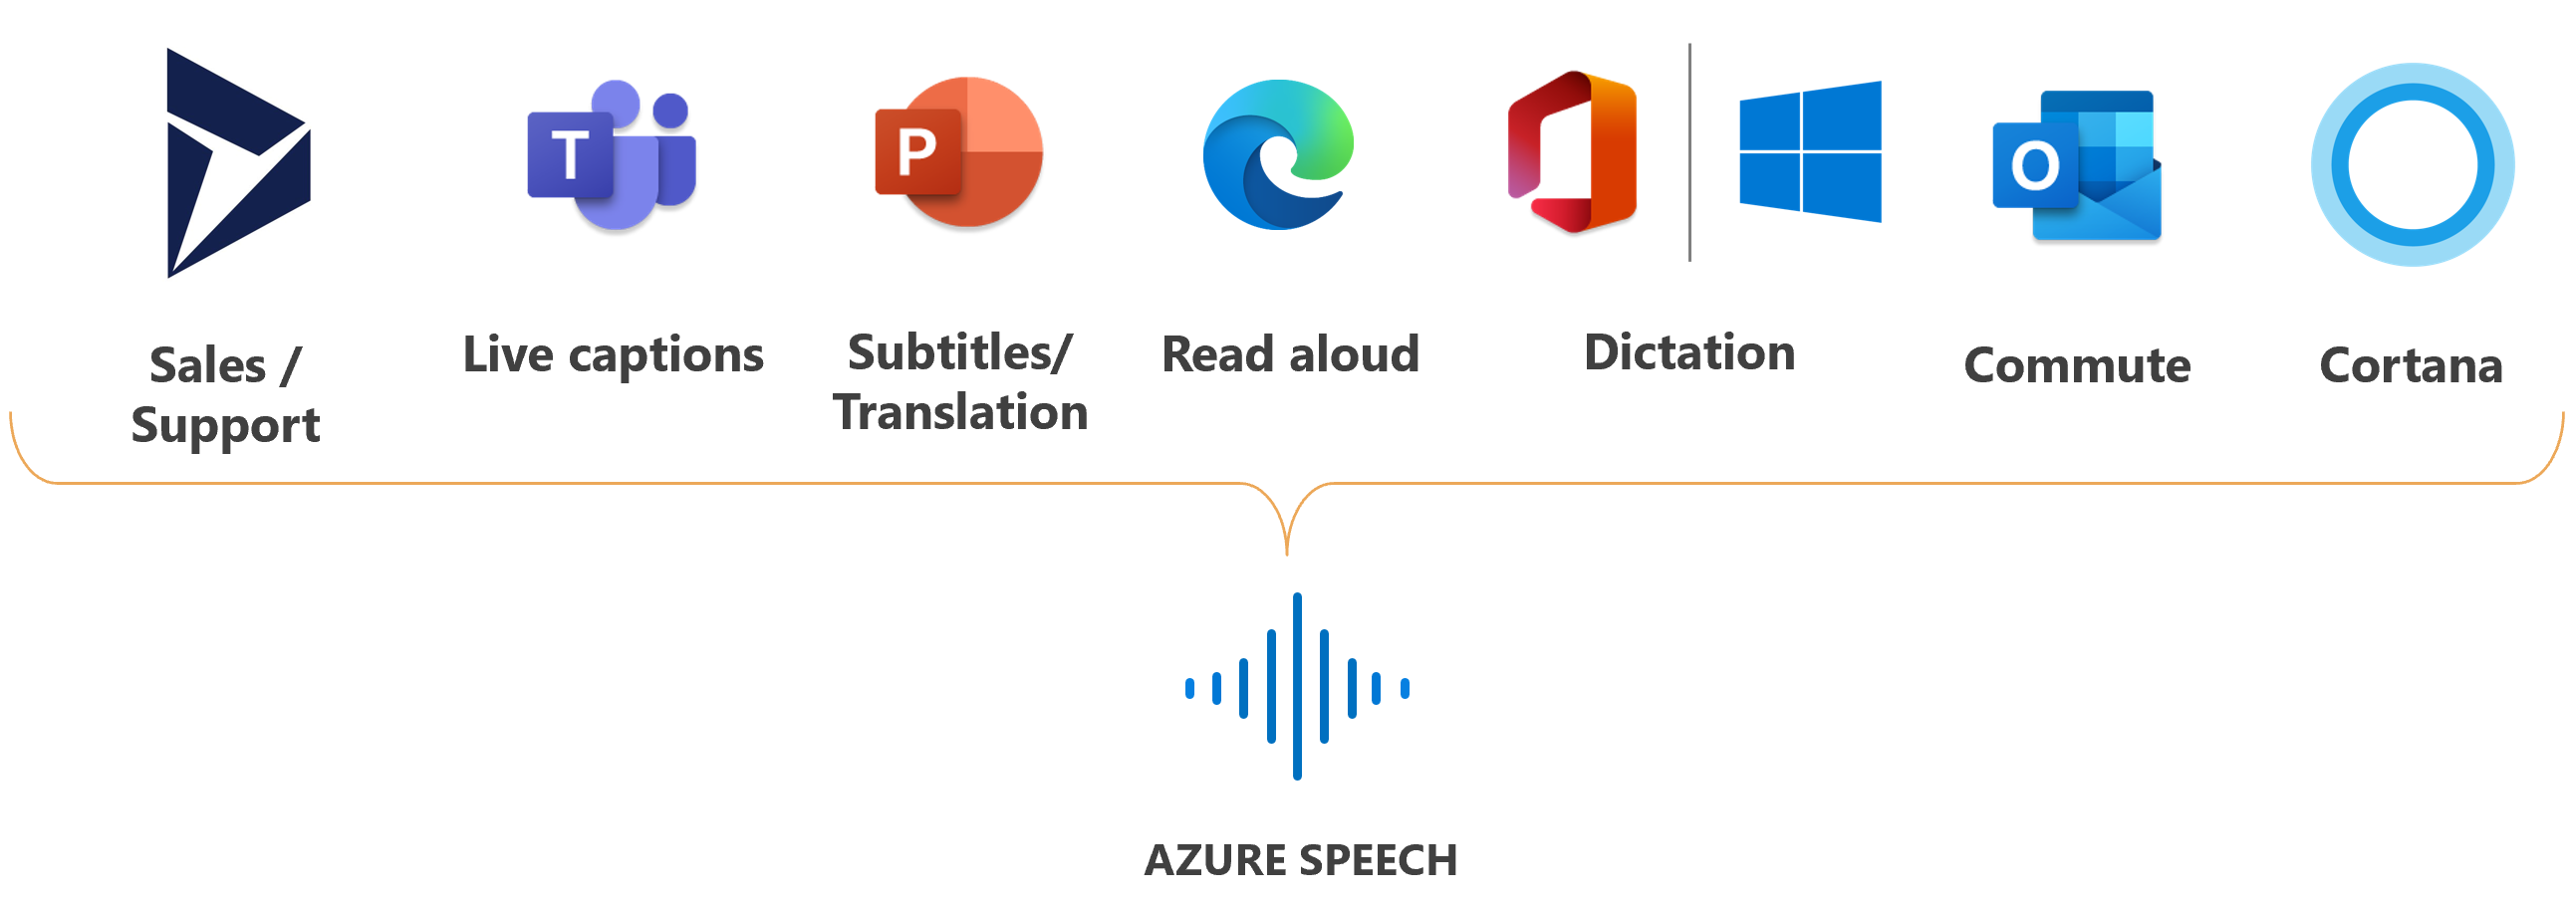 Image showing logos of Microsoft products where Speech service is used.